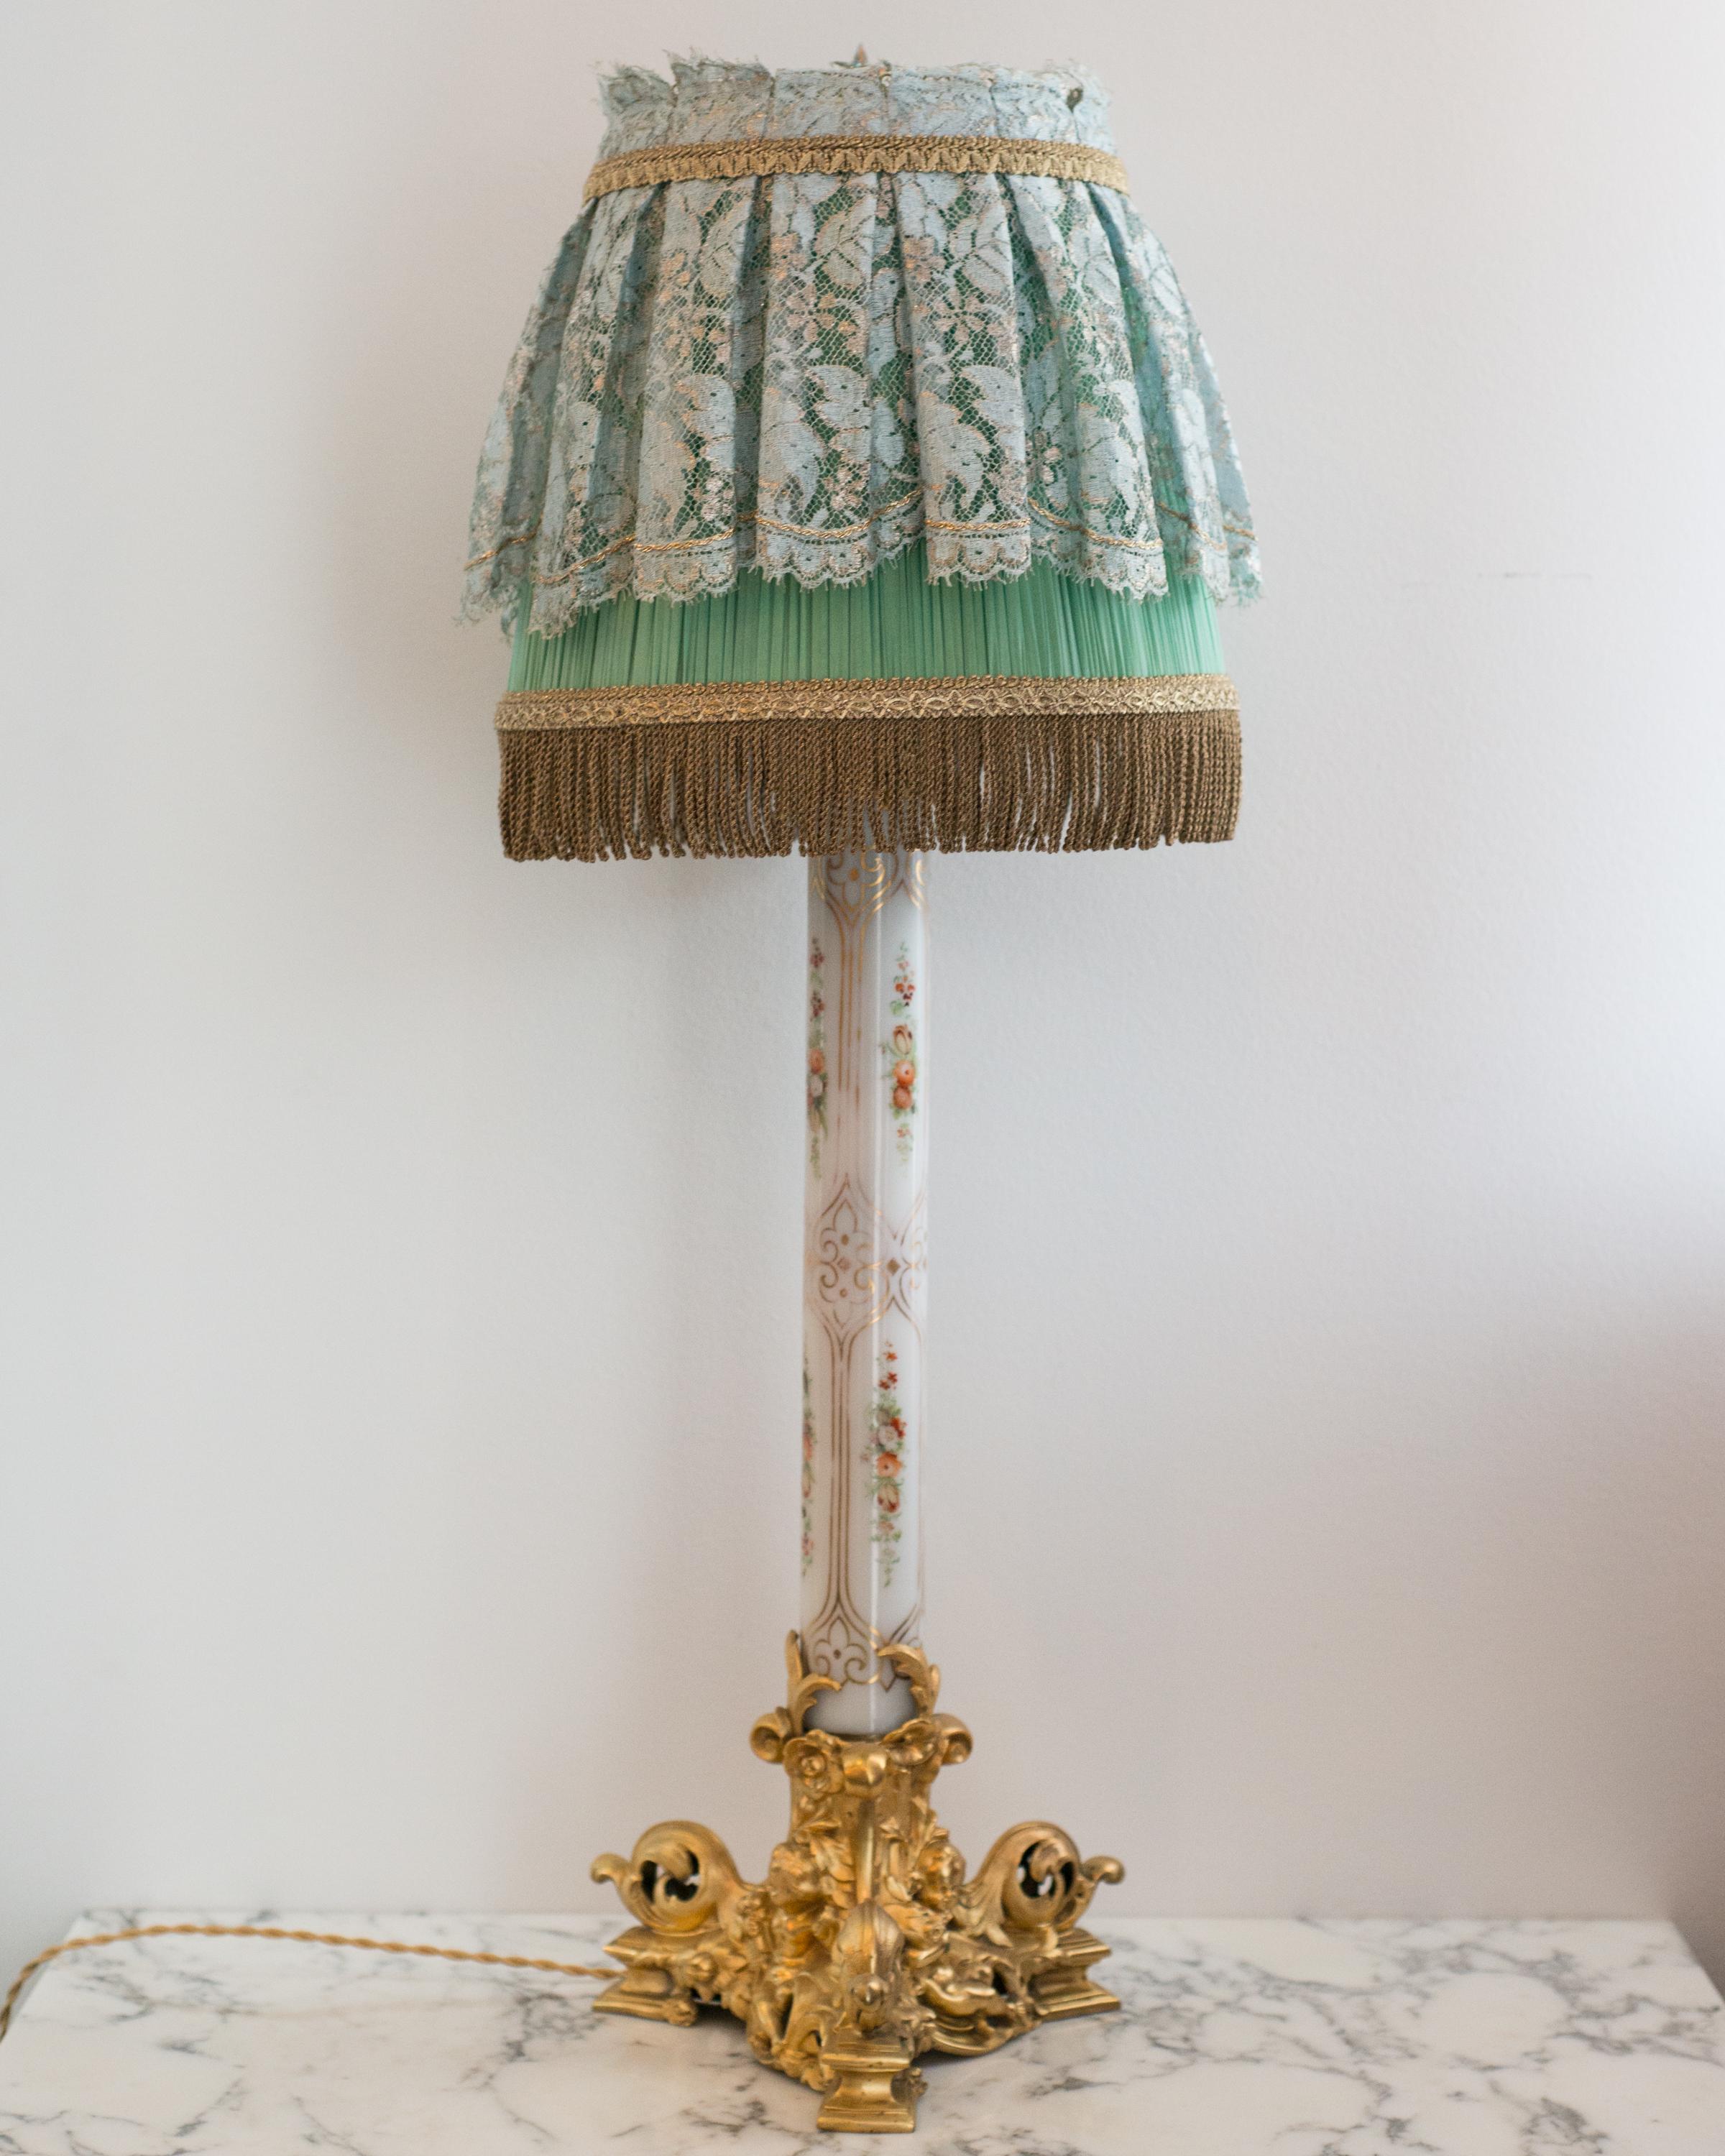 A unique French Napoleon III opaline glass lamp with gilt and flower details on an ornate bronze base, newly rewired with a magnificent shade of lace, pleated silk and metallic bullion trim.

